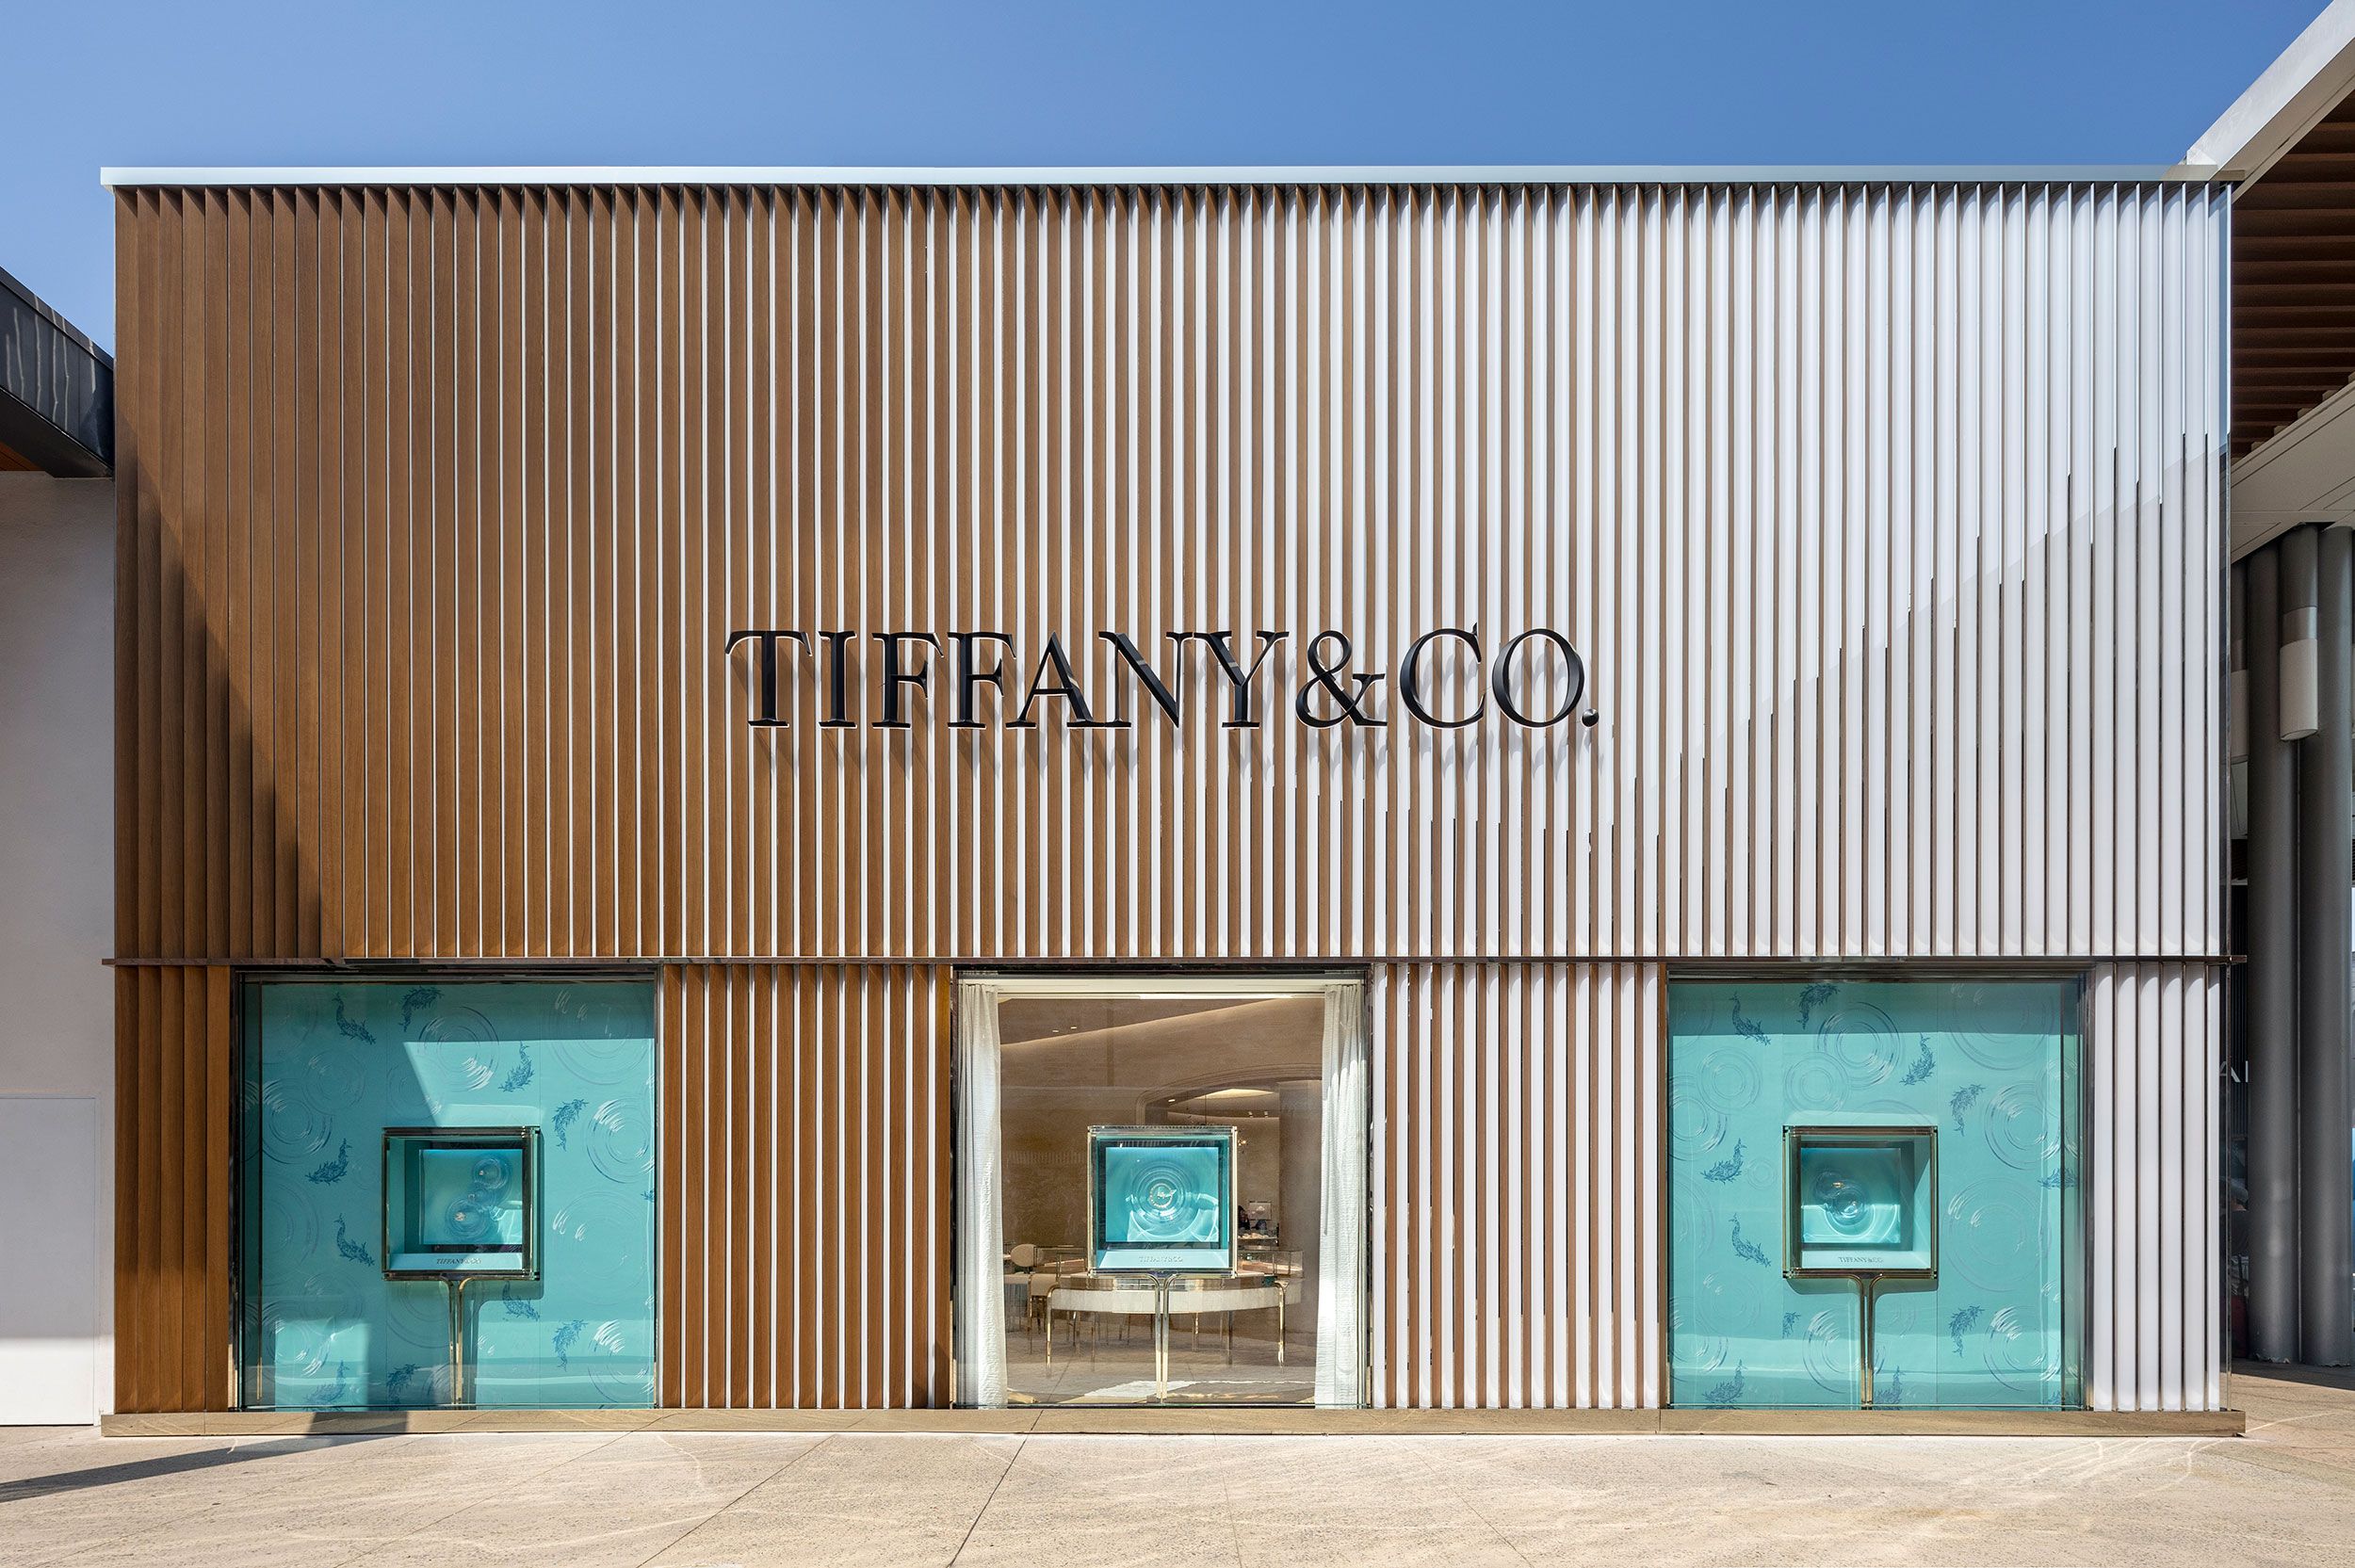 Tiffany & Co.: Tiffany & Co. Unveiled New Location and Redesigned